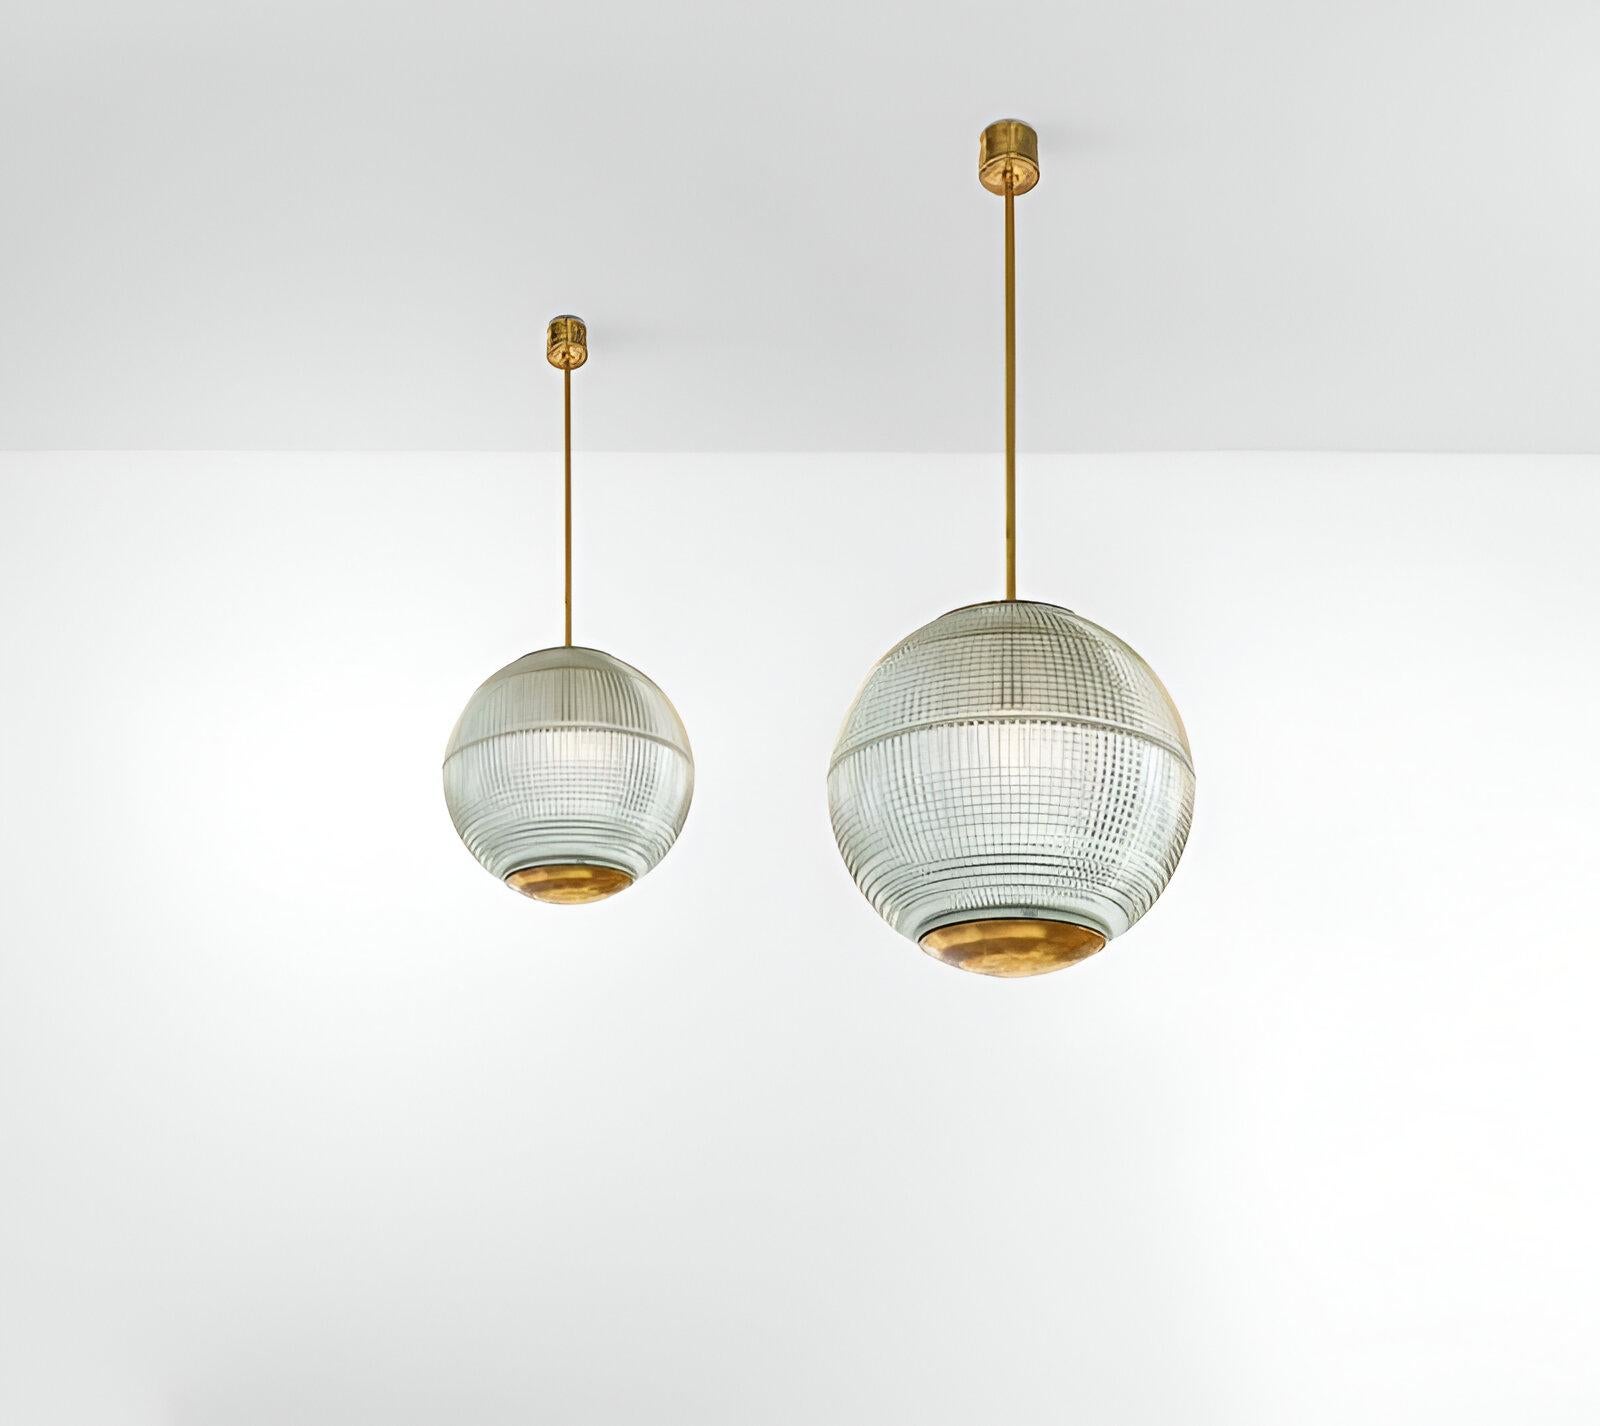 These suspension lamps feature an elegant metal structure that enhances their fine French Design while their exquisite moulded glass diffusers delicately disperse light, creating a warm and inviting glow. These elegant lamps perfectly complete any